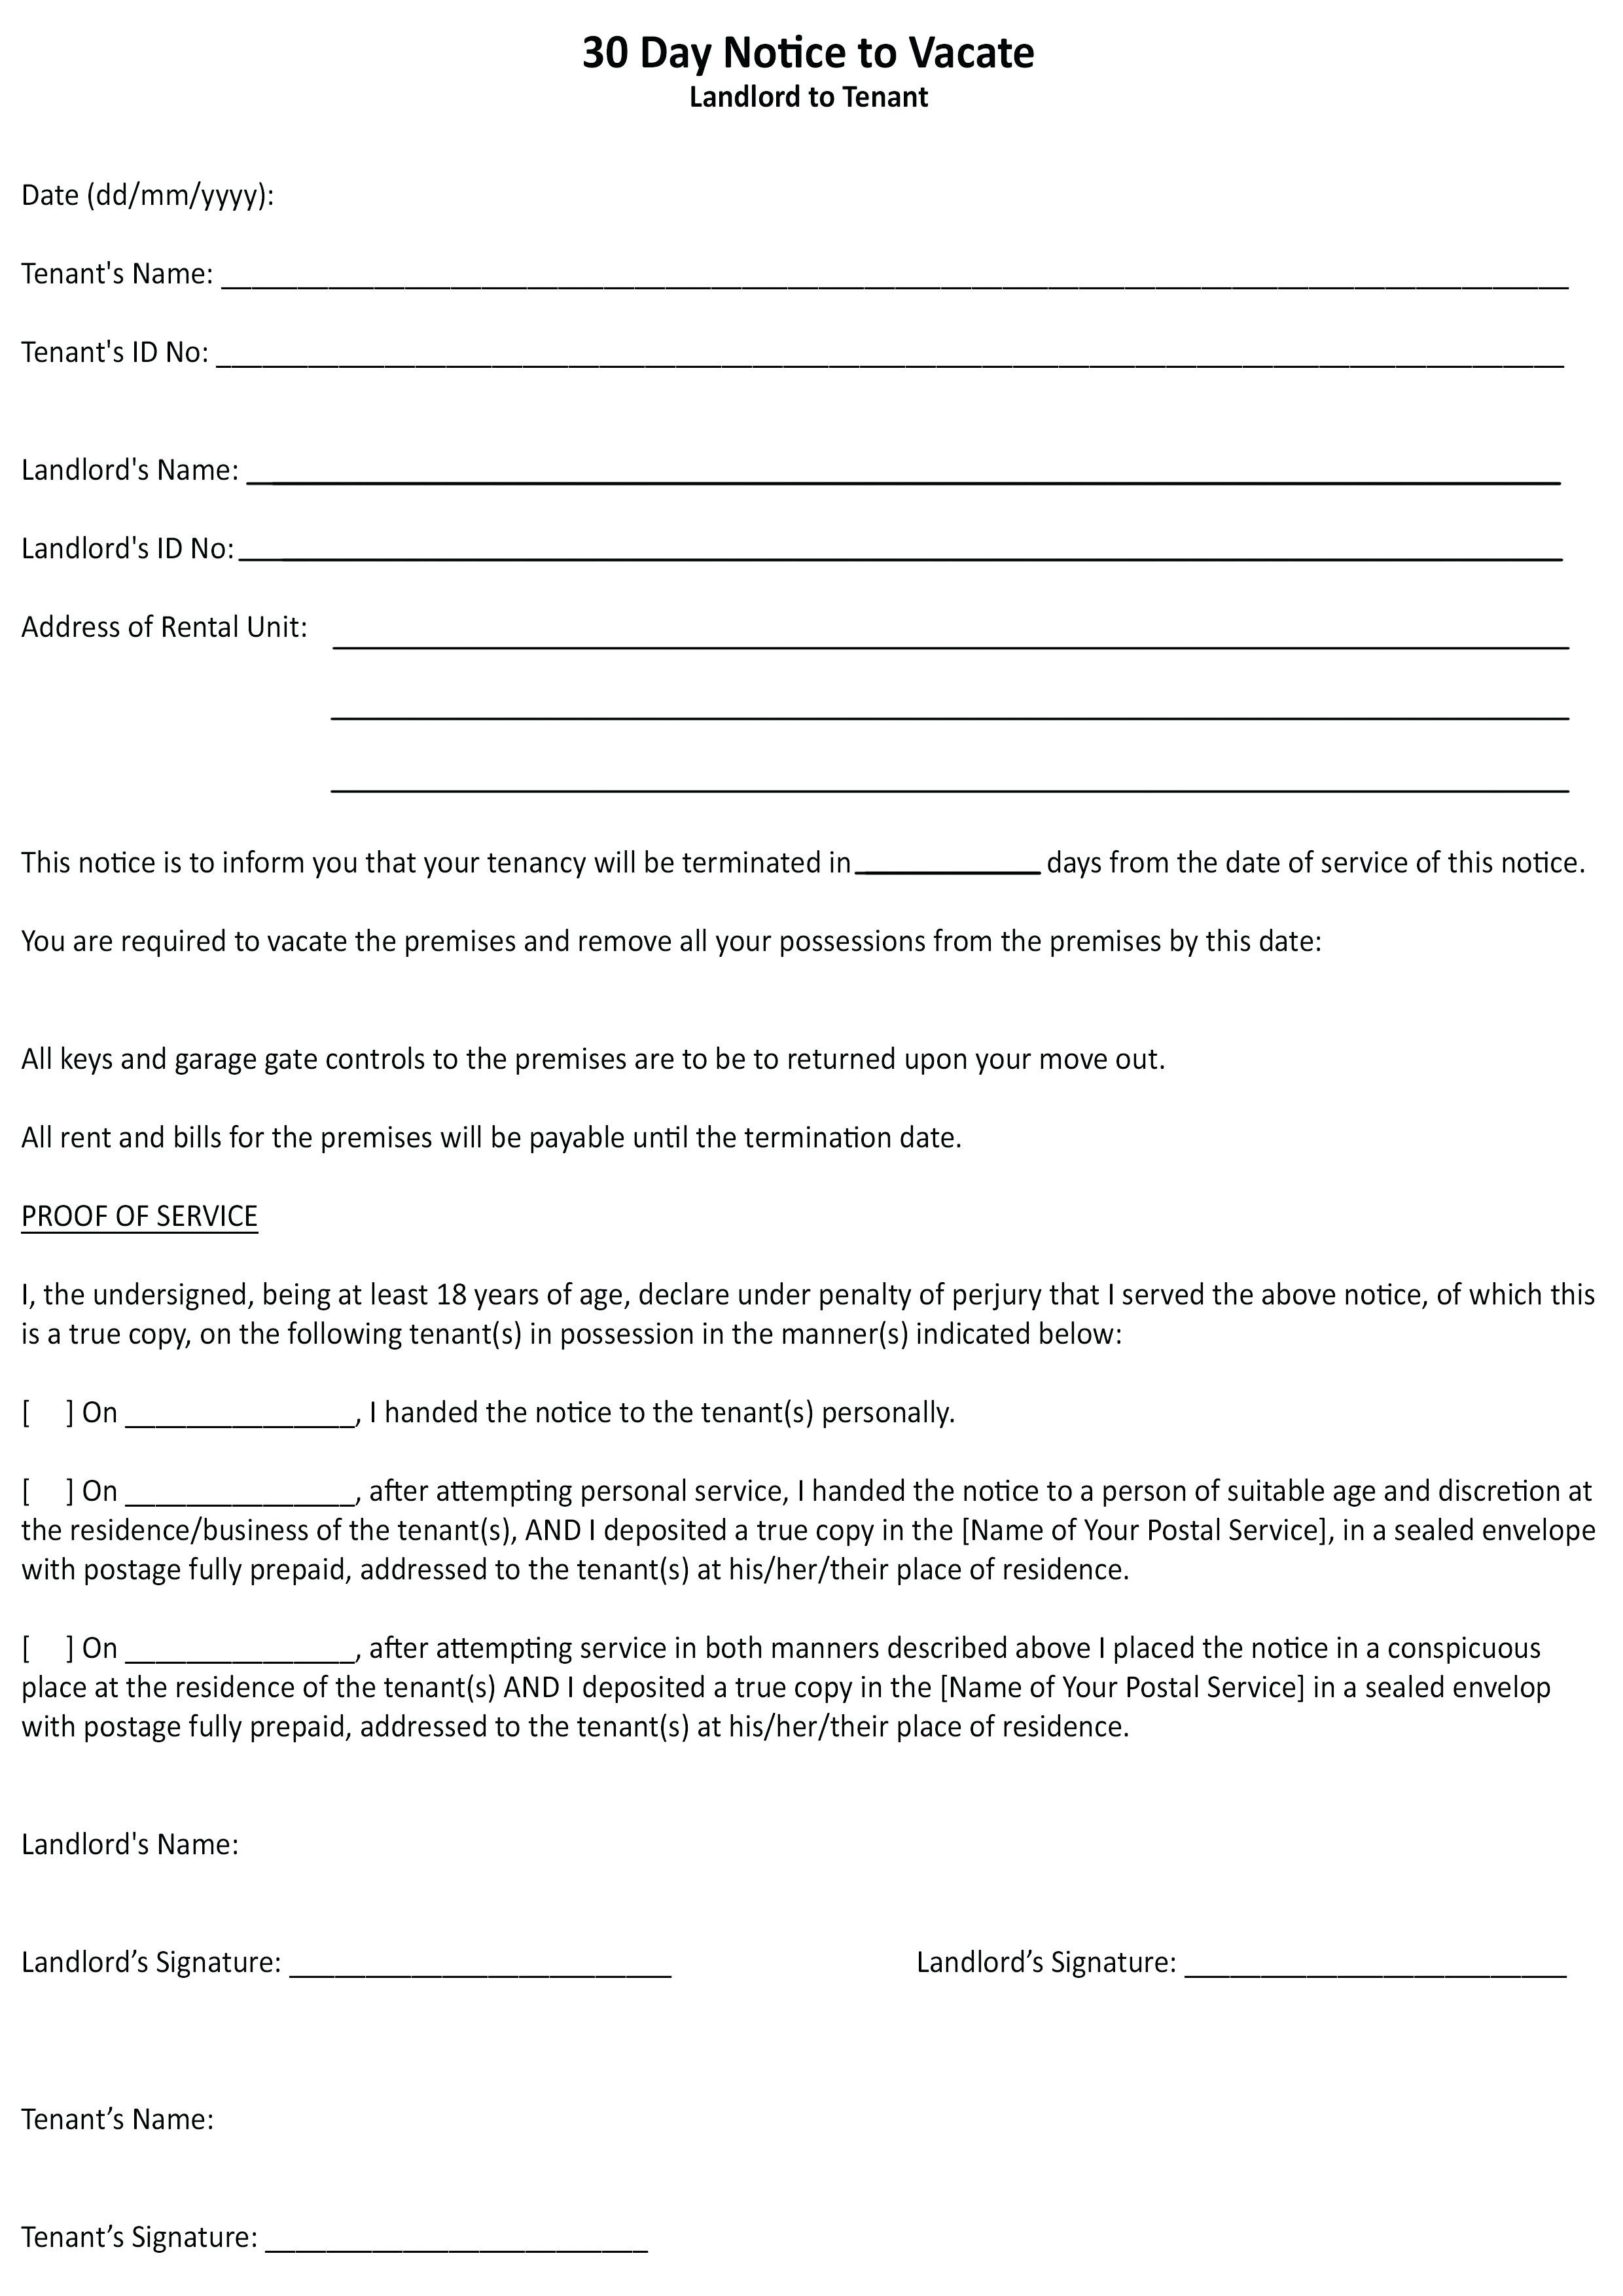 Termination Of Rental Agreement Letter Template - Certificate Employment Sample for Credit Card Application Best